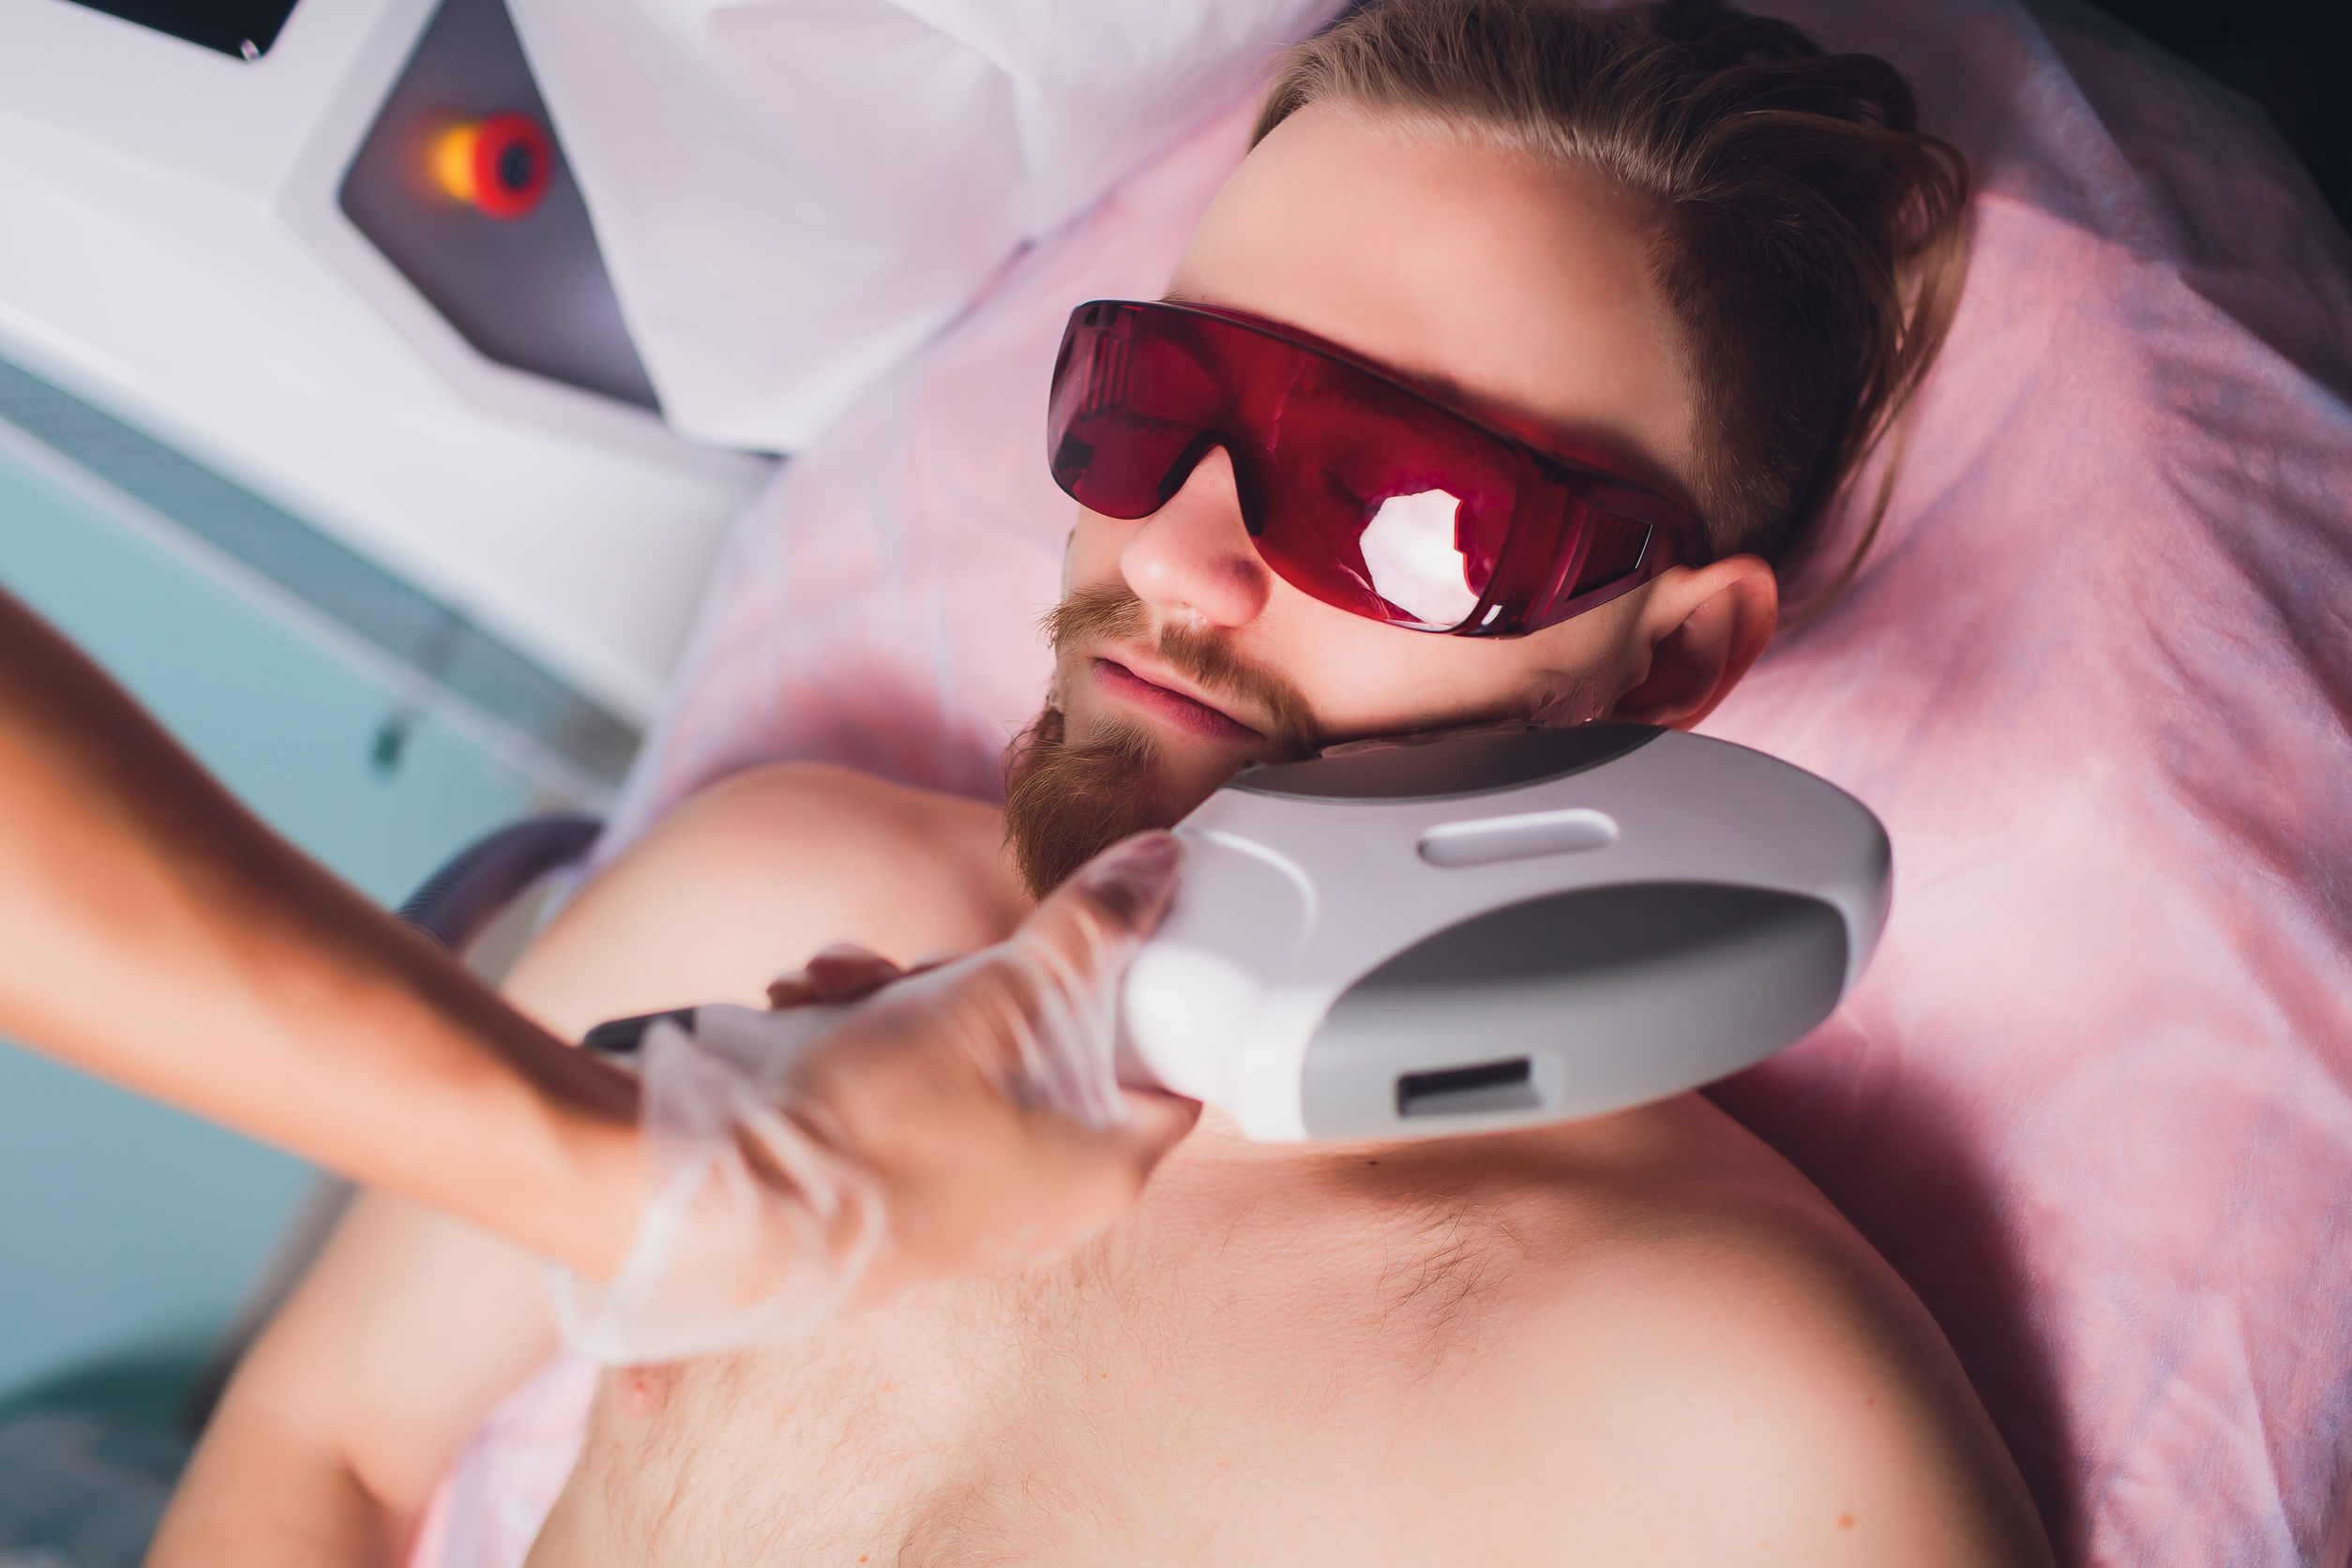 How to prepare for laser hair removal procedures?